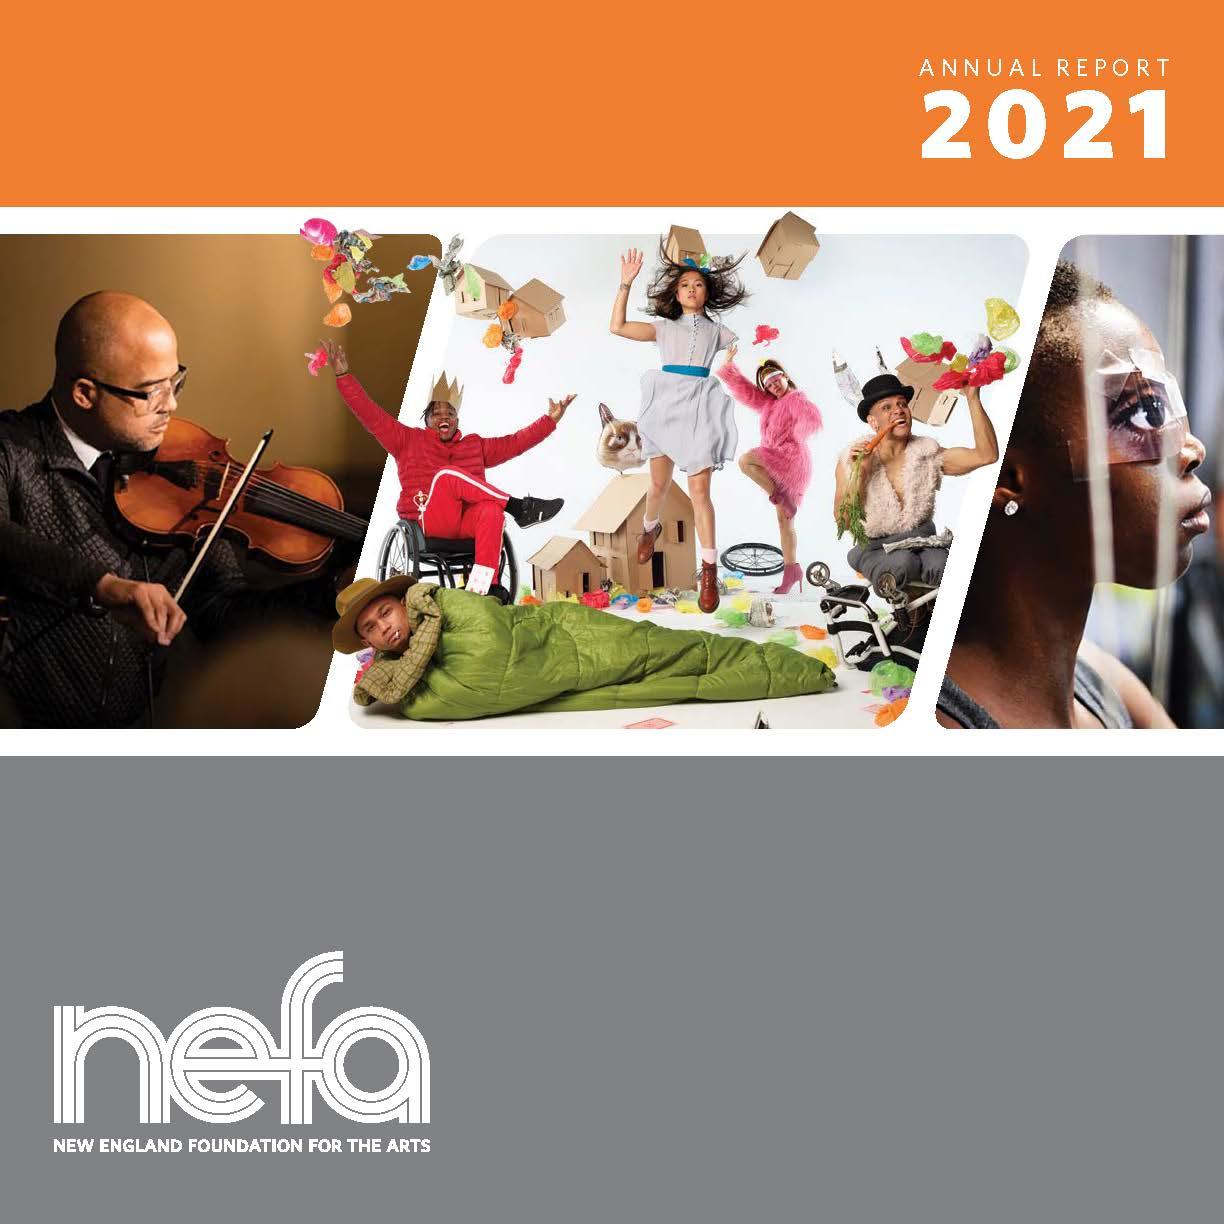 NEFA's annual report cover has orange and gray rows, with a filmstrip in the middle that has an image of a violinist, dancers in floral costumes, and a child with eyes taped over their own eyes.